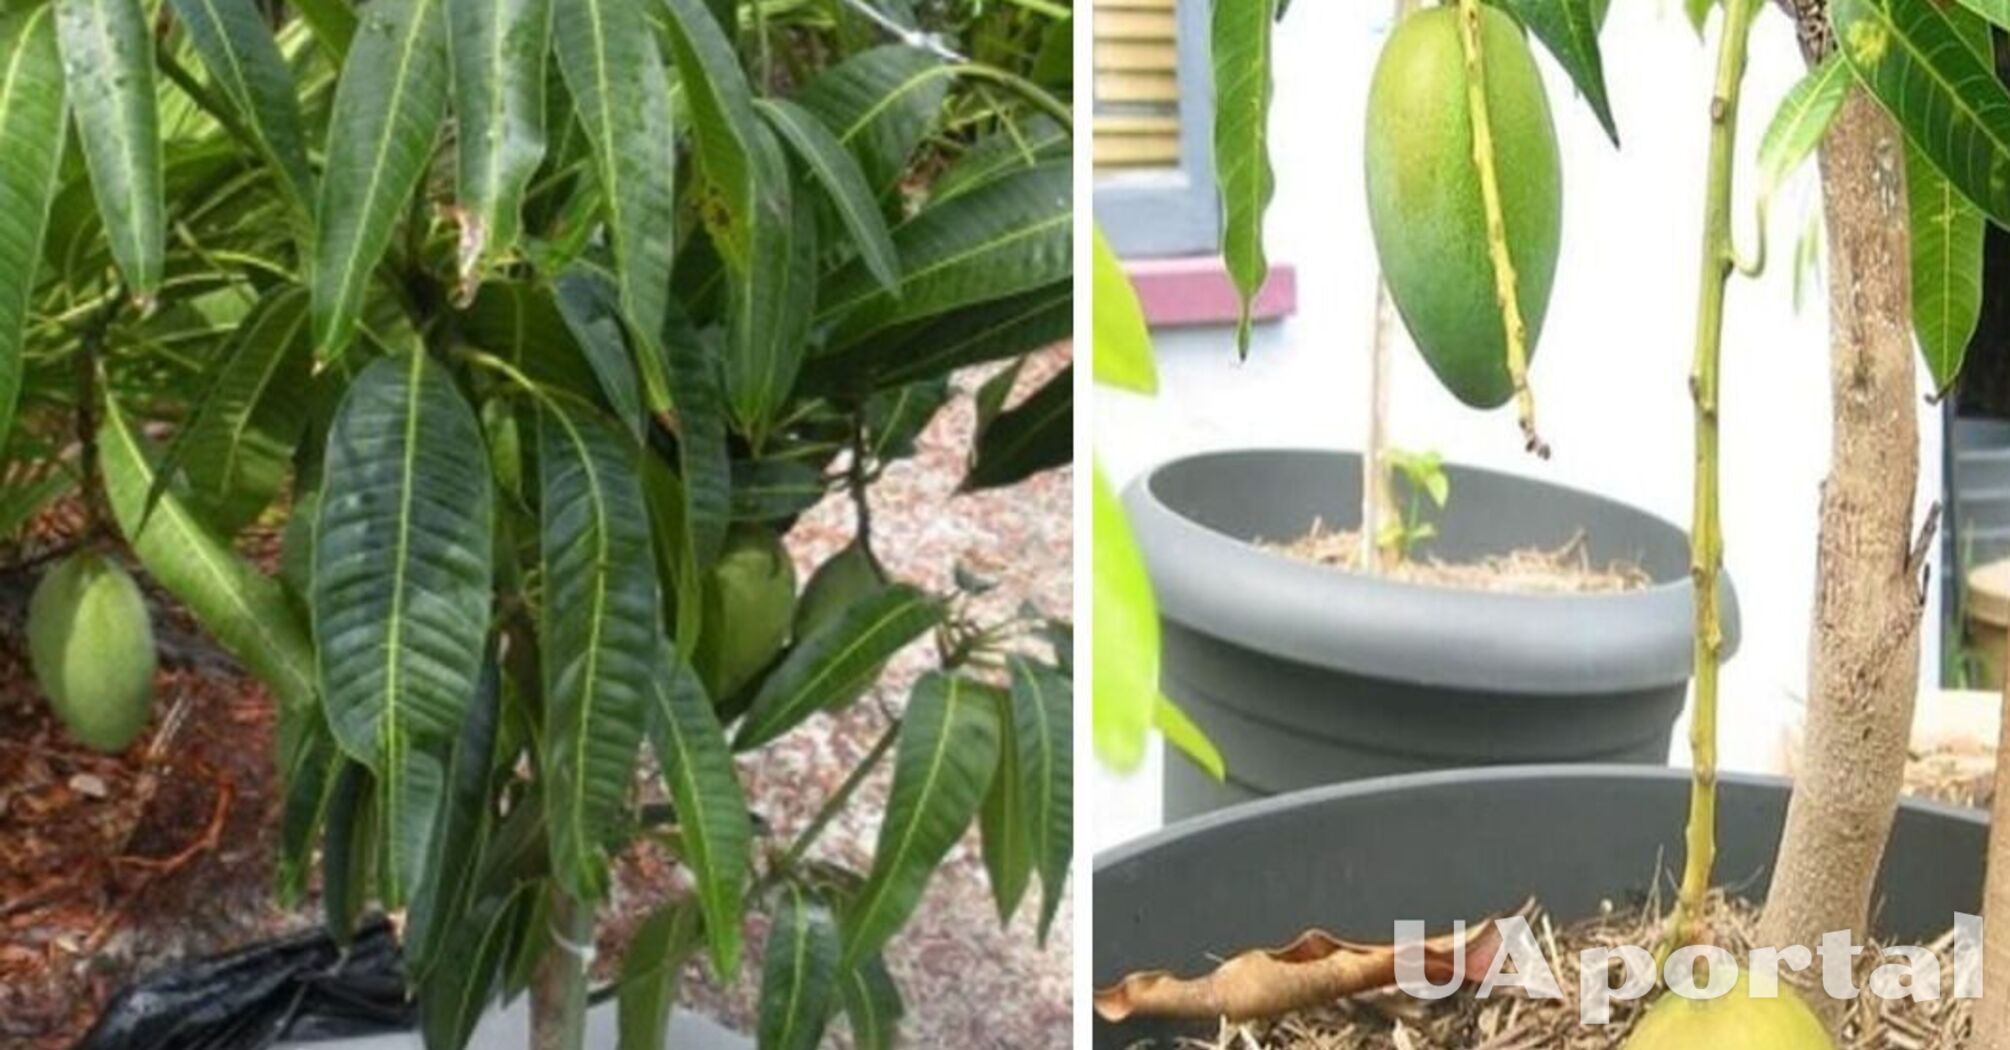 Florists answered how to grow mangoes from a seed at home 